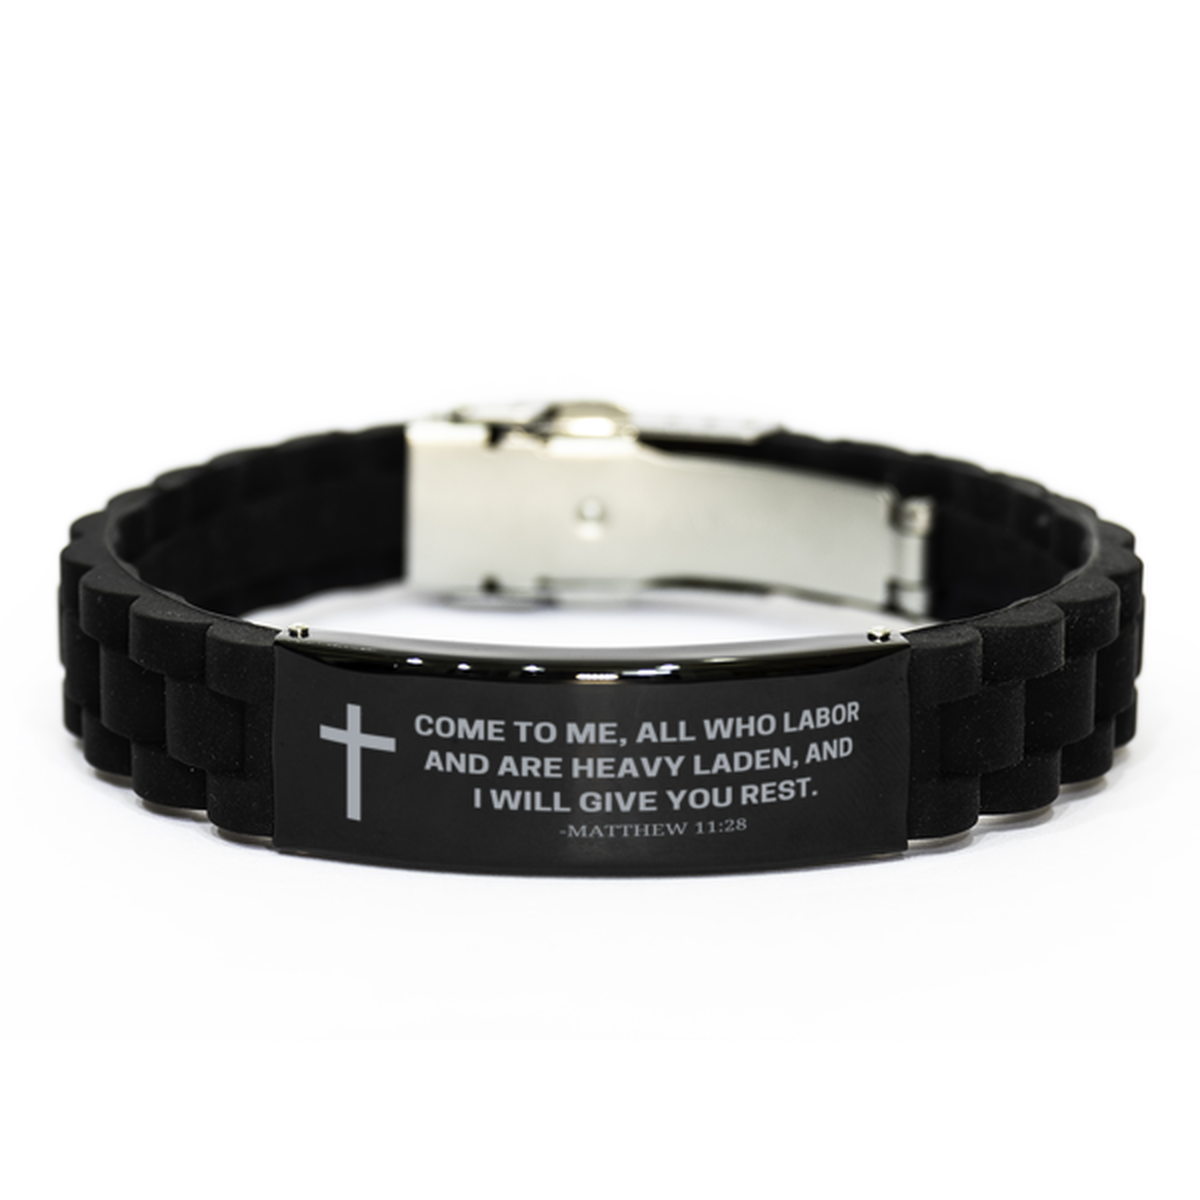 Baptism Gifts For Teenage Boys Girls, Christian Bible Verse Black Glidelock Clasp Bracelet, Come to me, all who labor, Catholic Confirmation Gifts for Son, Godson, Grandson, Nephew